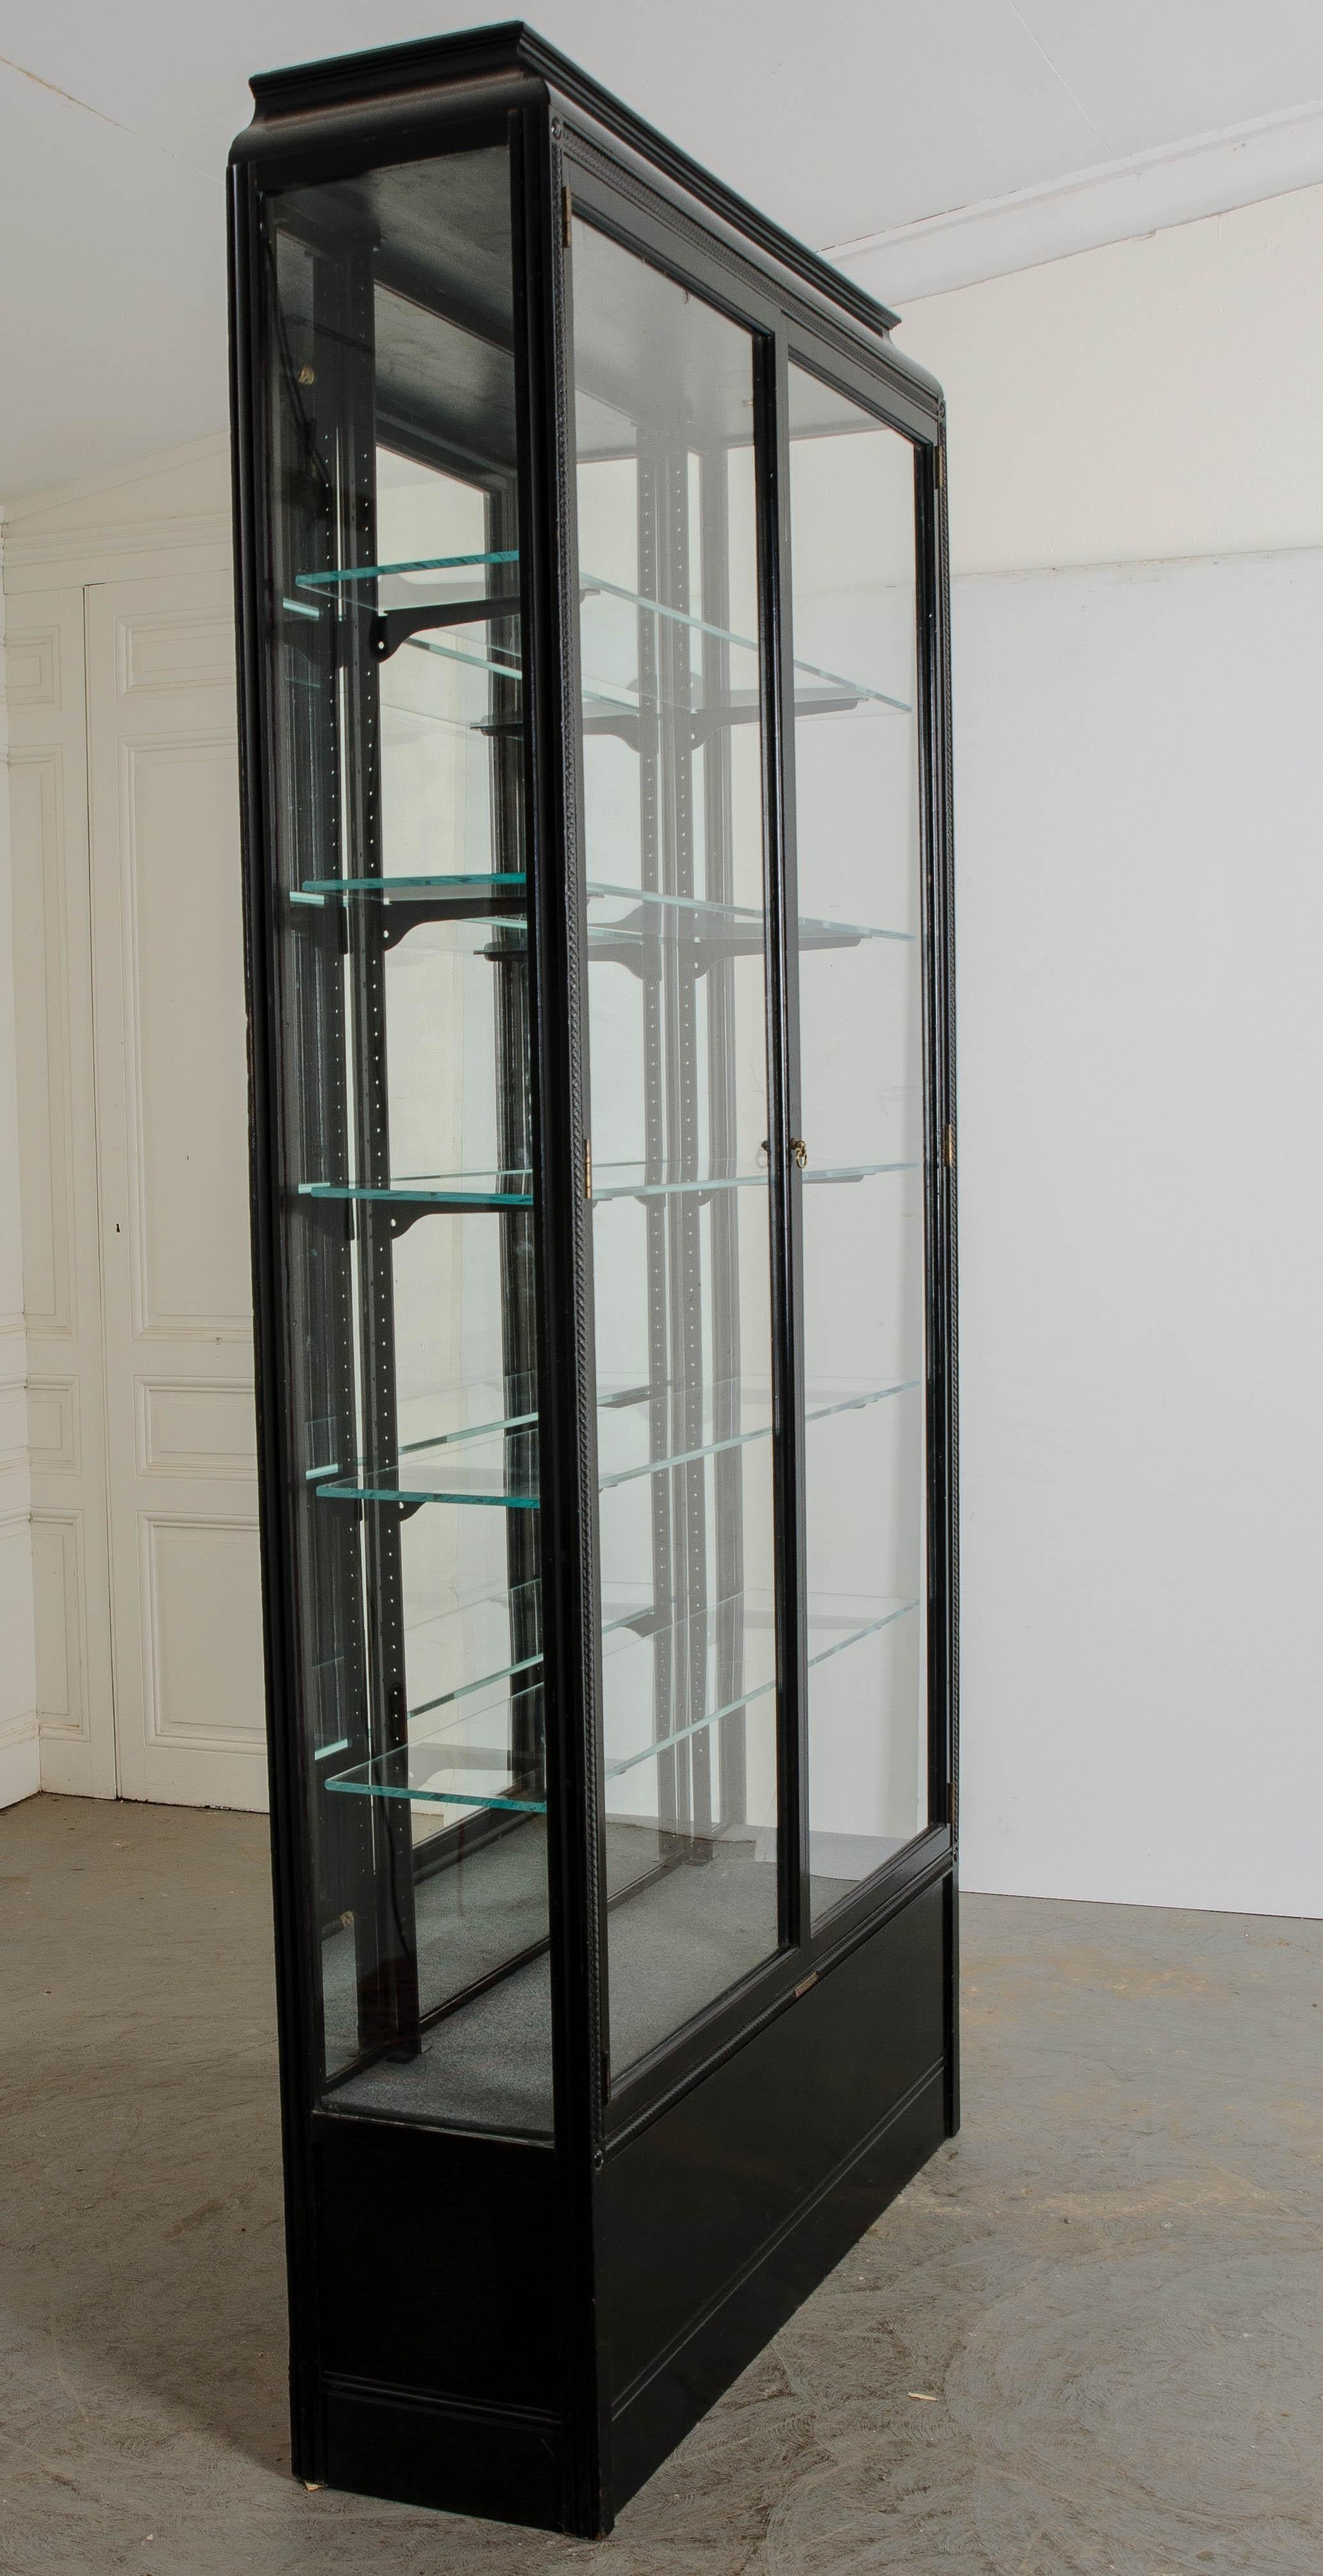 A tall, dark and handsome English vitrine, made in London, circa 1930 by E. Pollard & Co. Ltd.

This exceptional display case is a sight in and of itself! It is finished in a very smart ebonized black lacquer. The case piece has five shelves, made